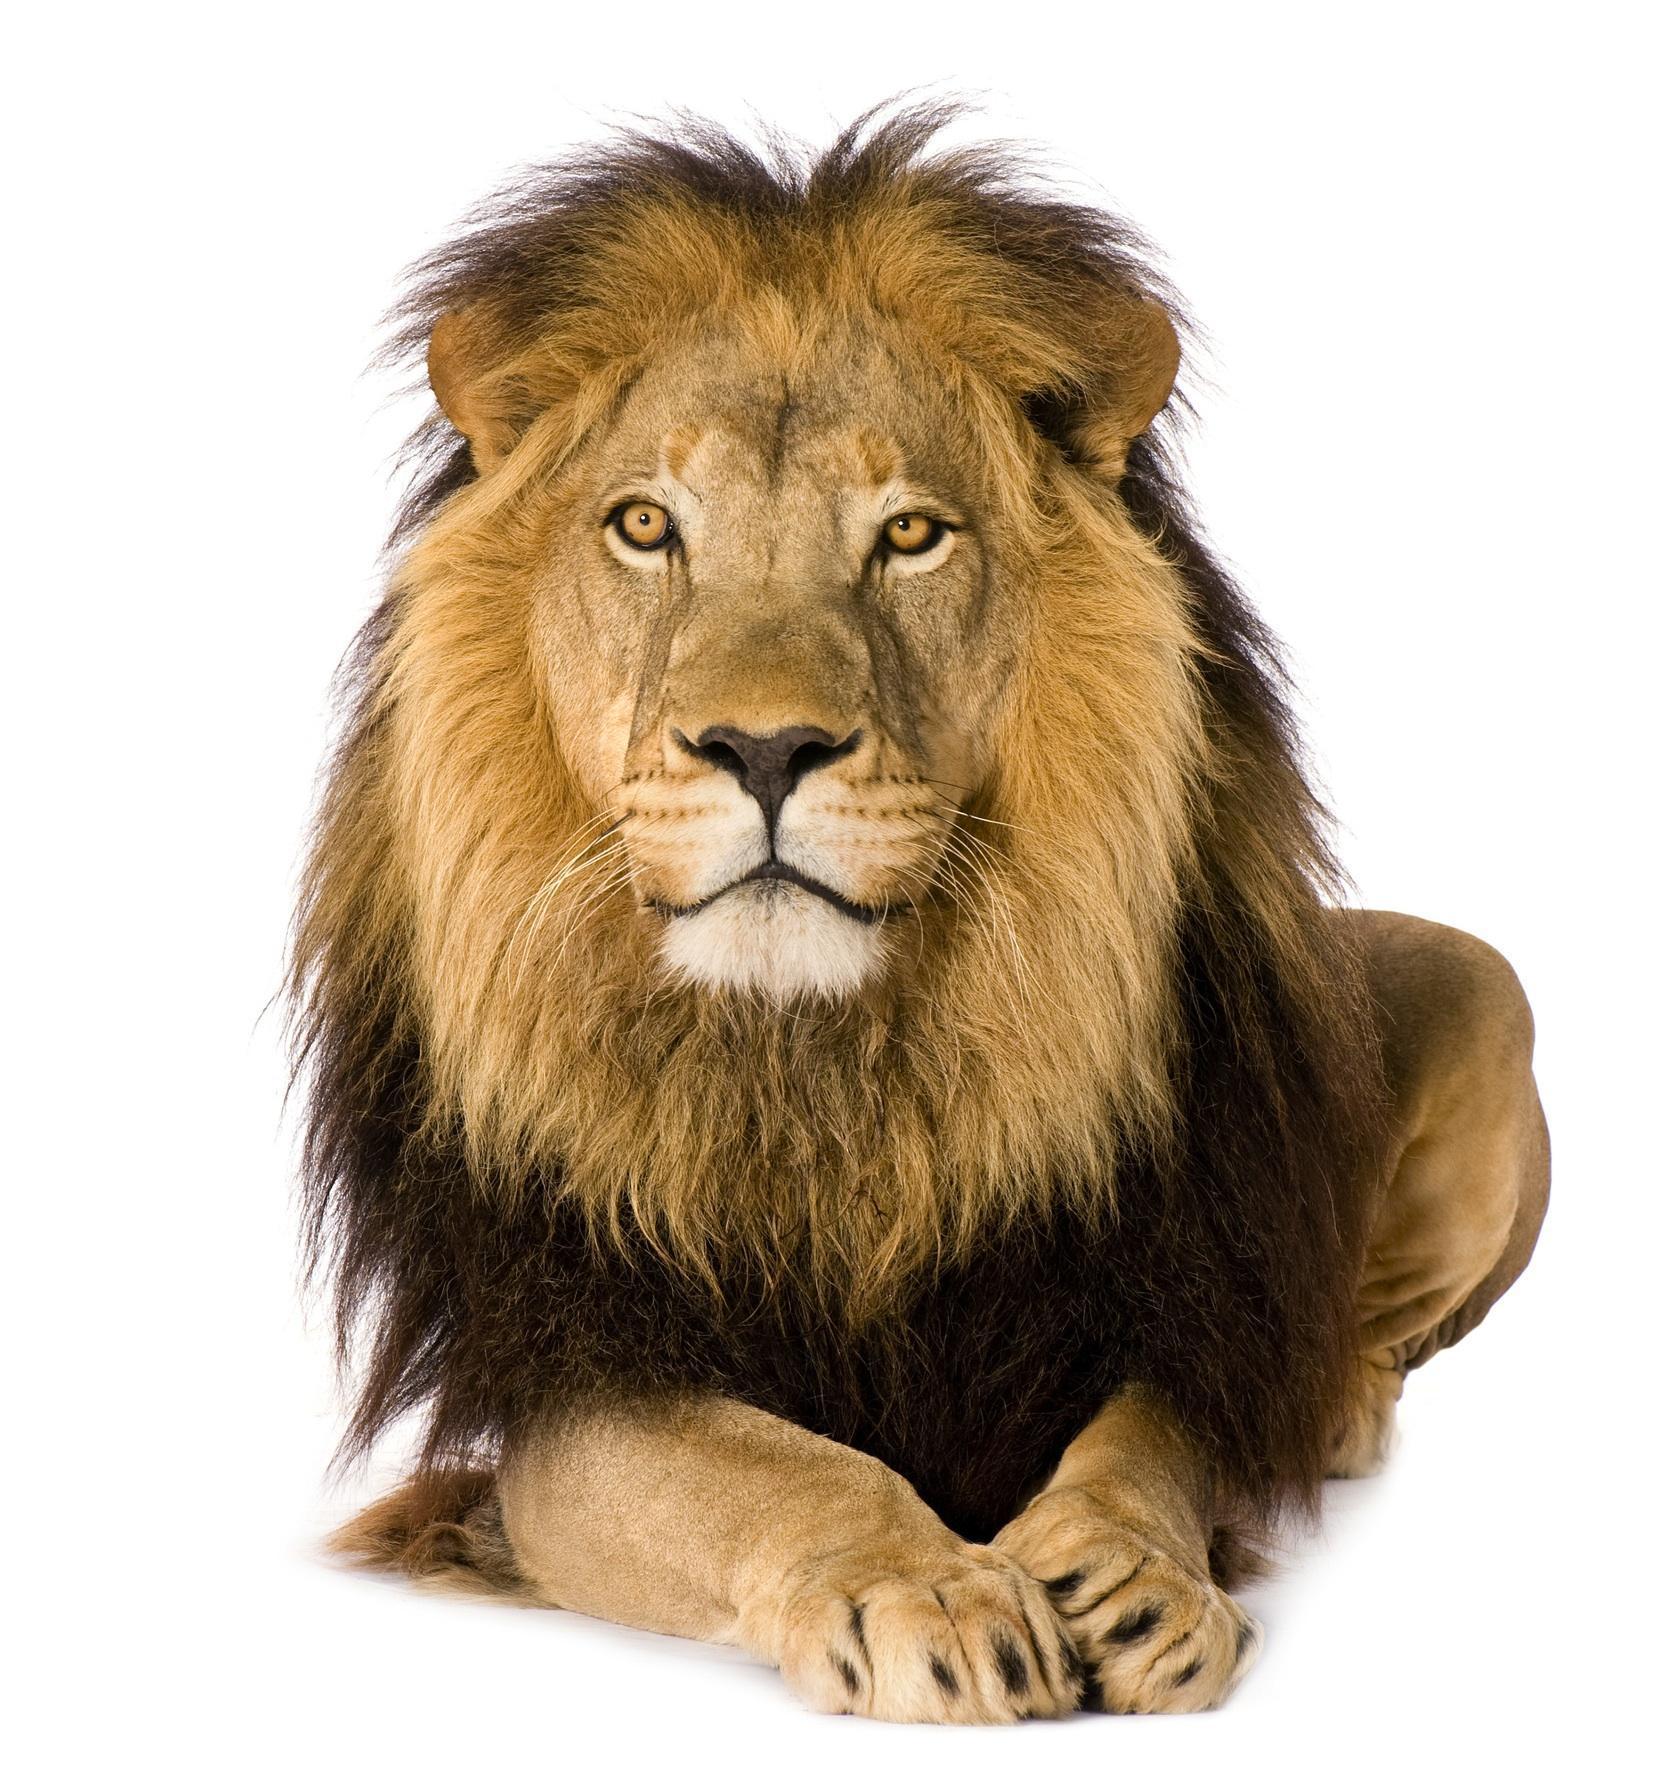 Lion White Backgrounds Wallpaper Cave